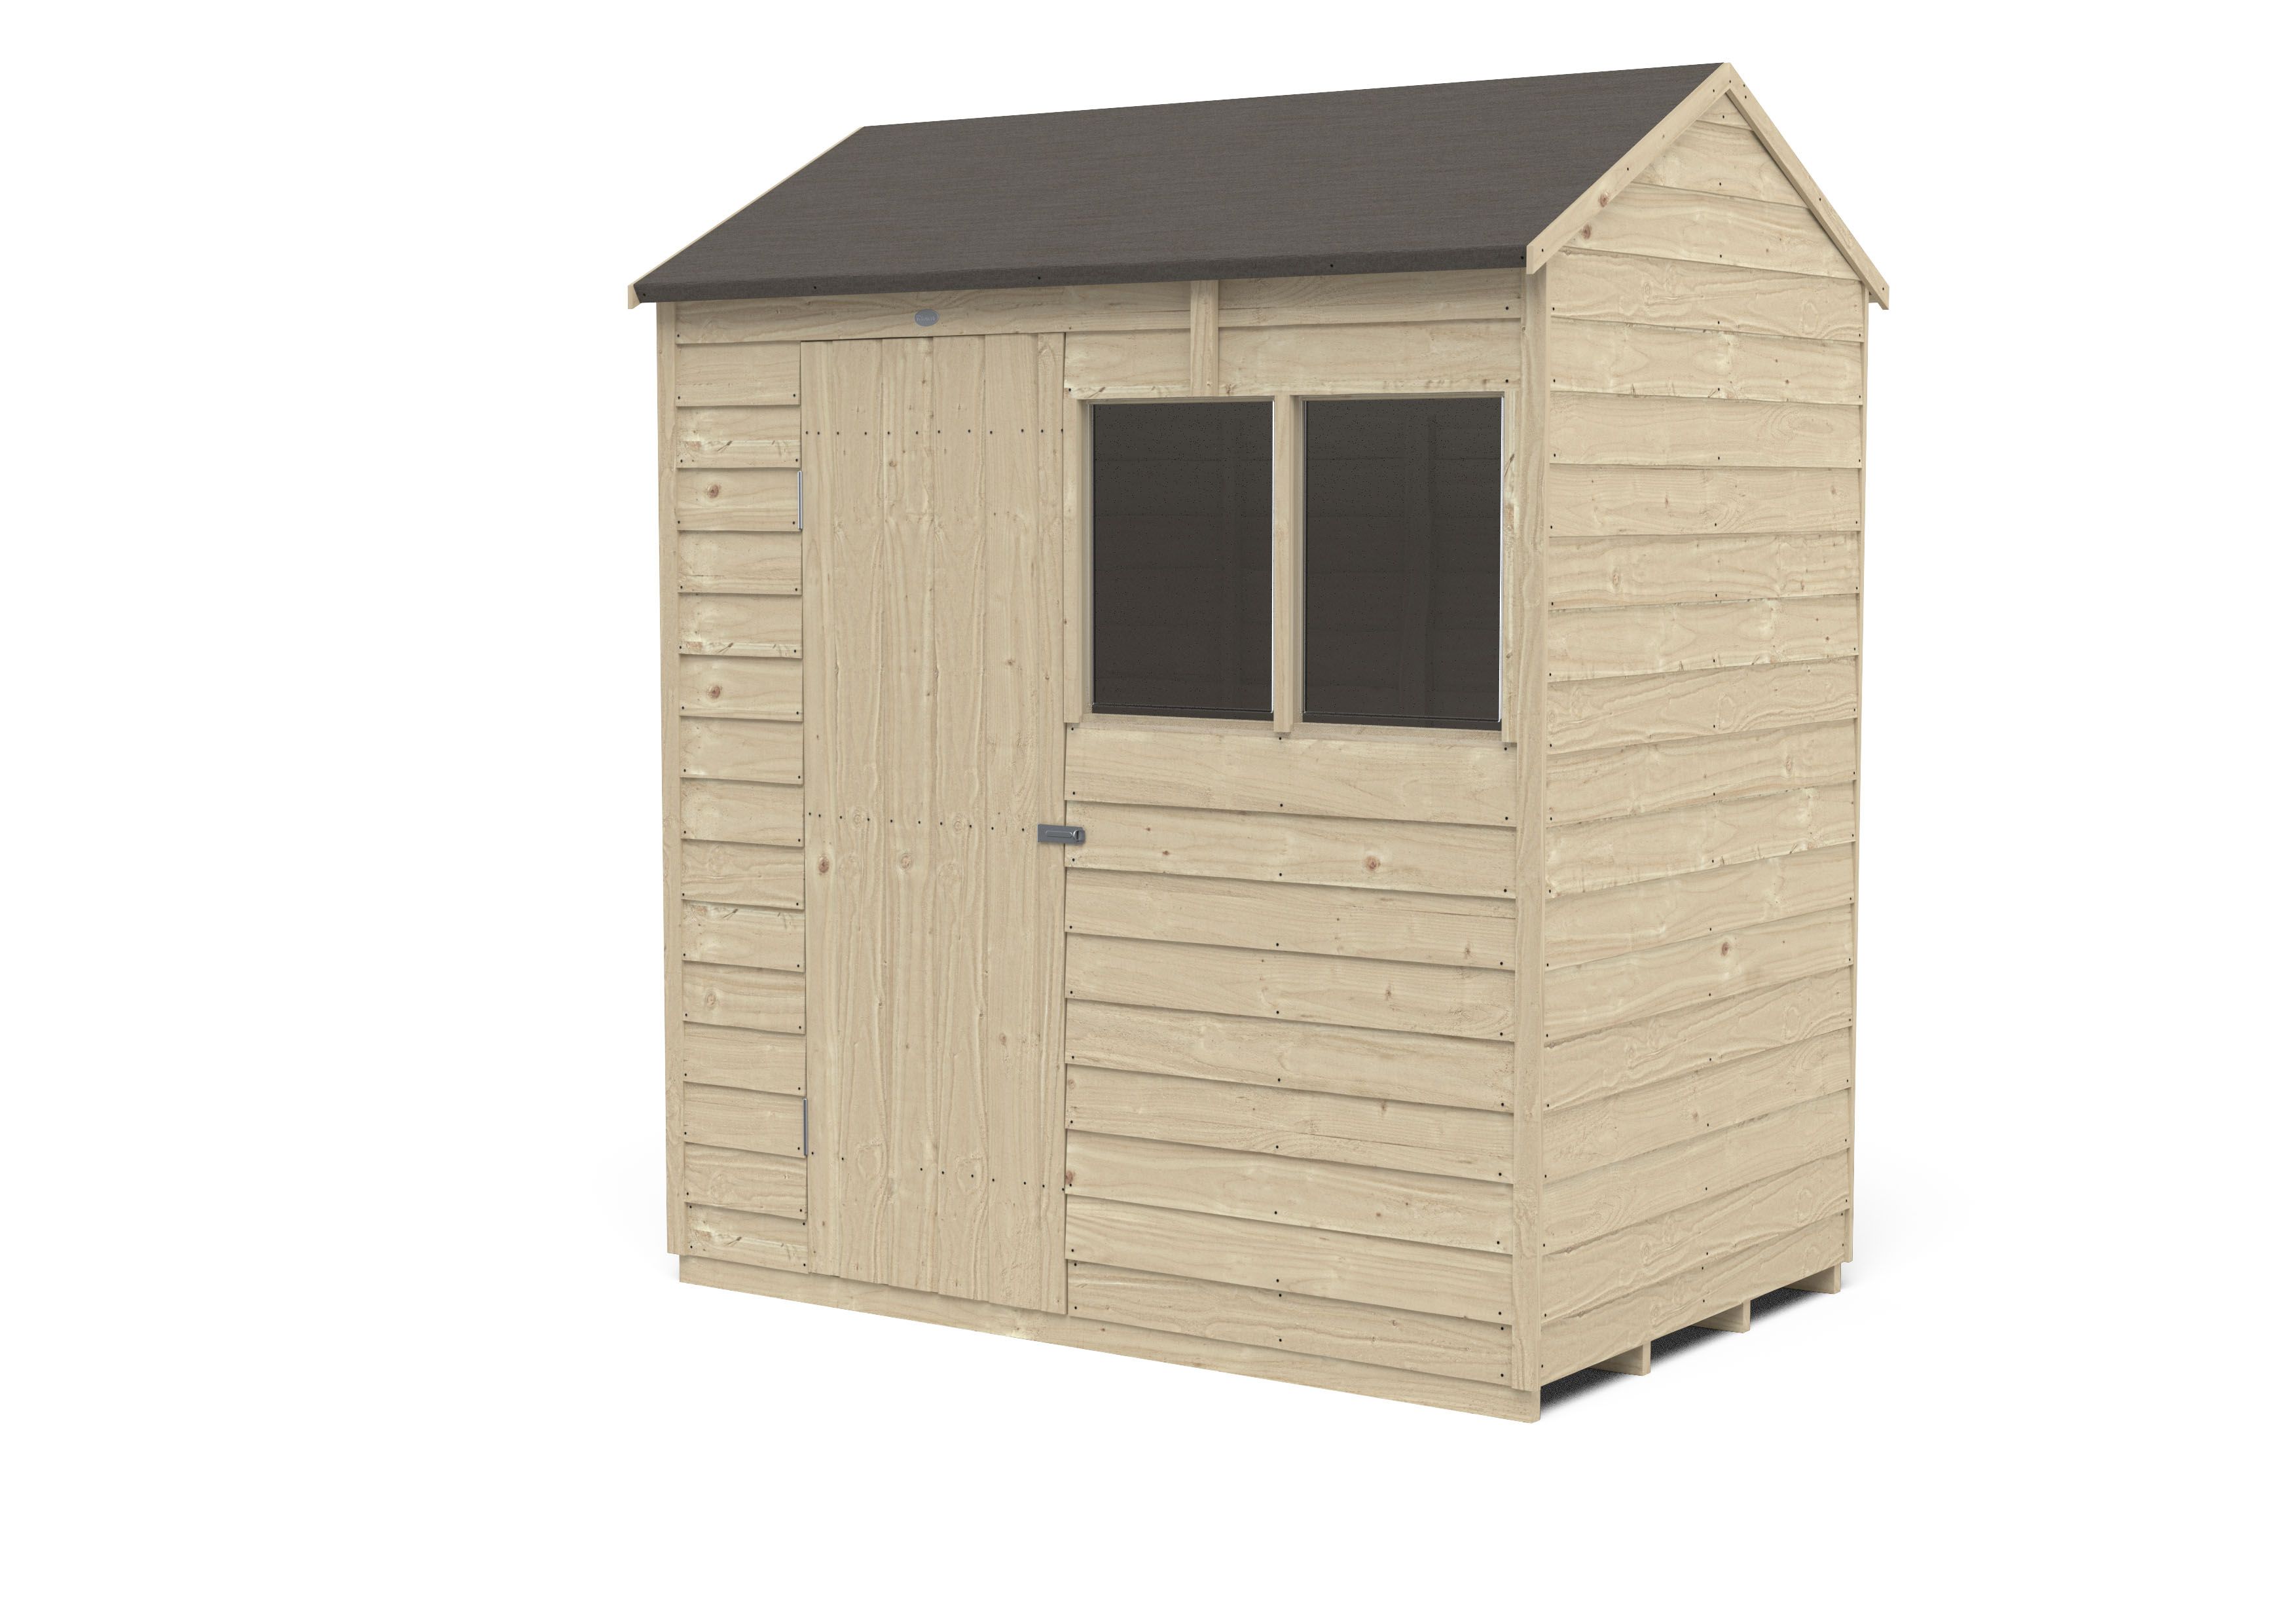 Forest Garden Overlap 6x4 ft Reverse apex Wooden Pressure treated Shed with floor & 2 windows - Assembly service included